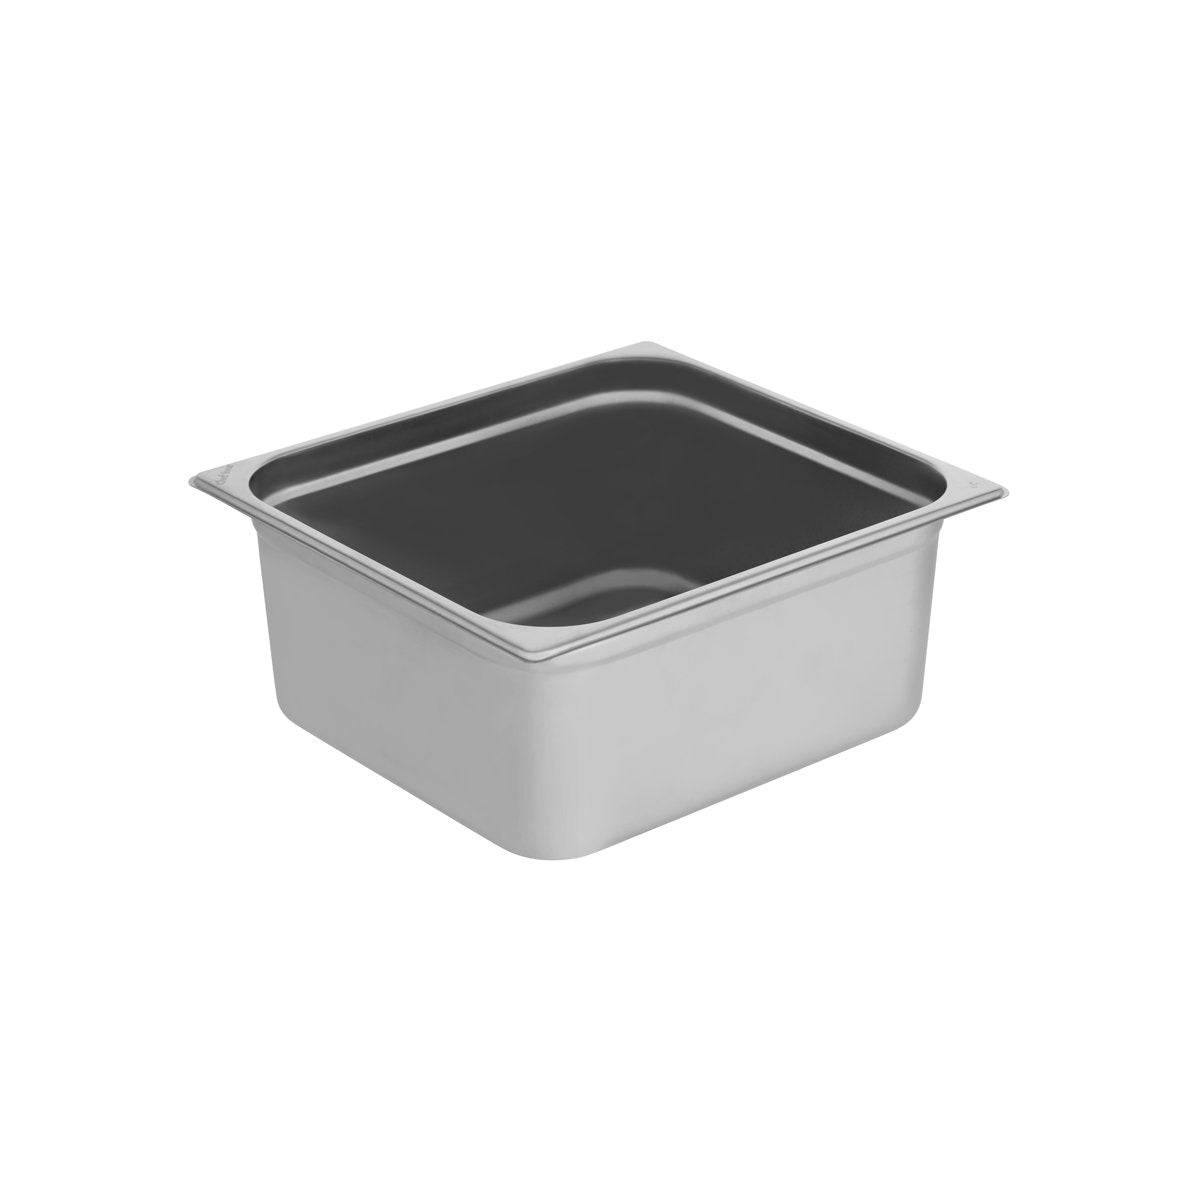 GN-23150 Chef Inox Gastronorm Pan 2/3 Size 150mm Tomkin Australia Hospitality Supplies